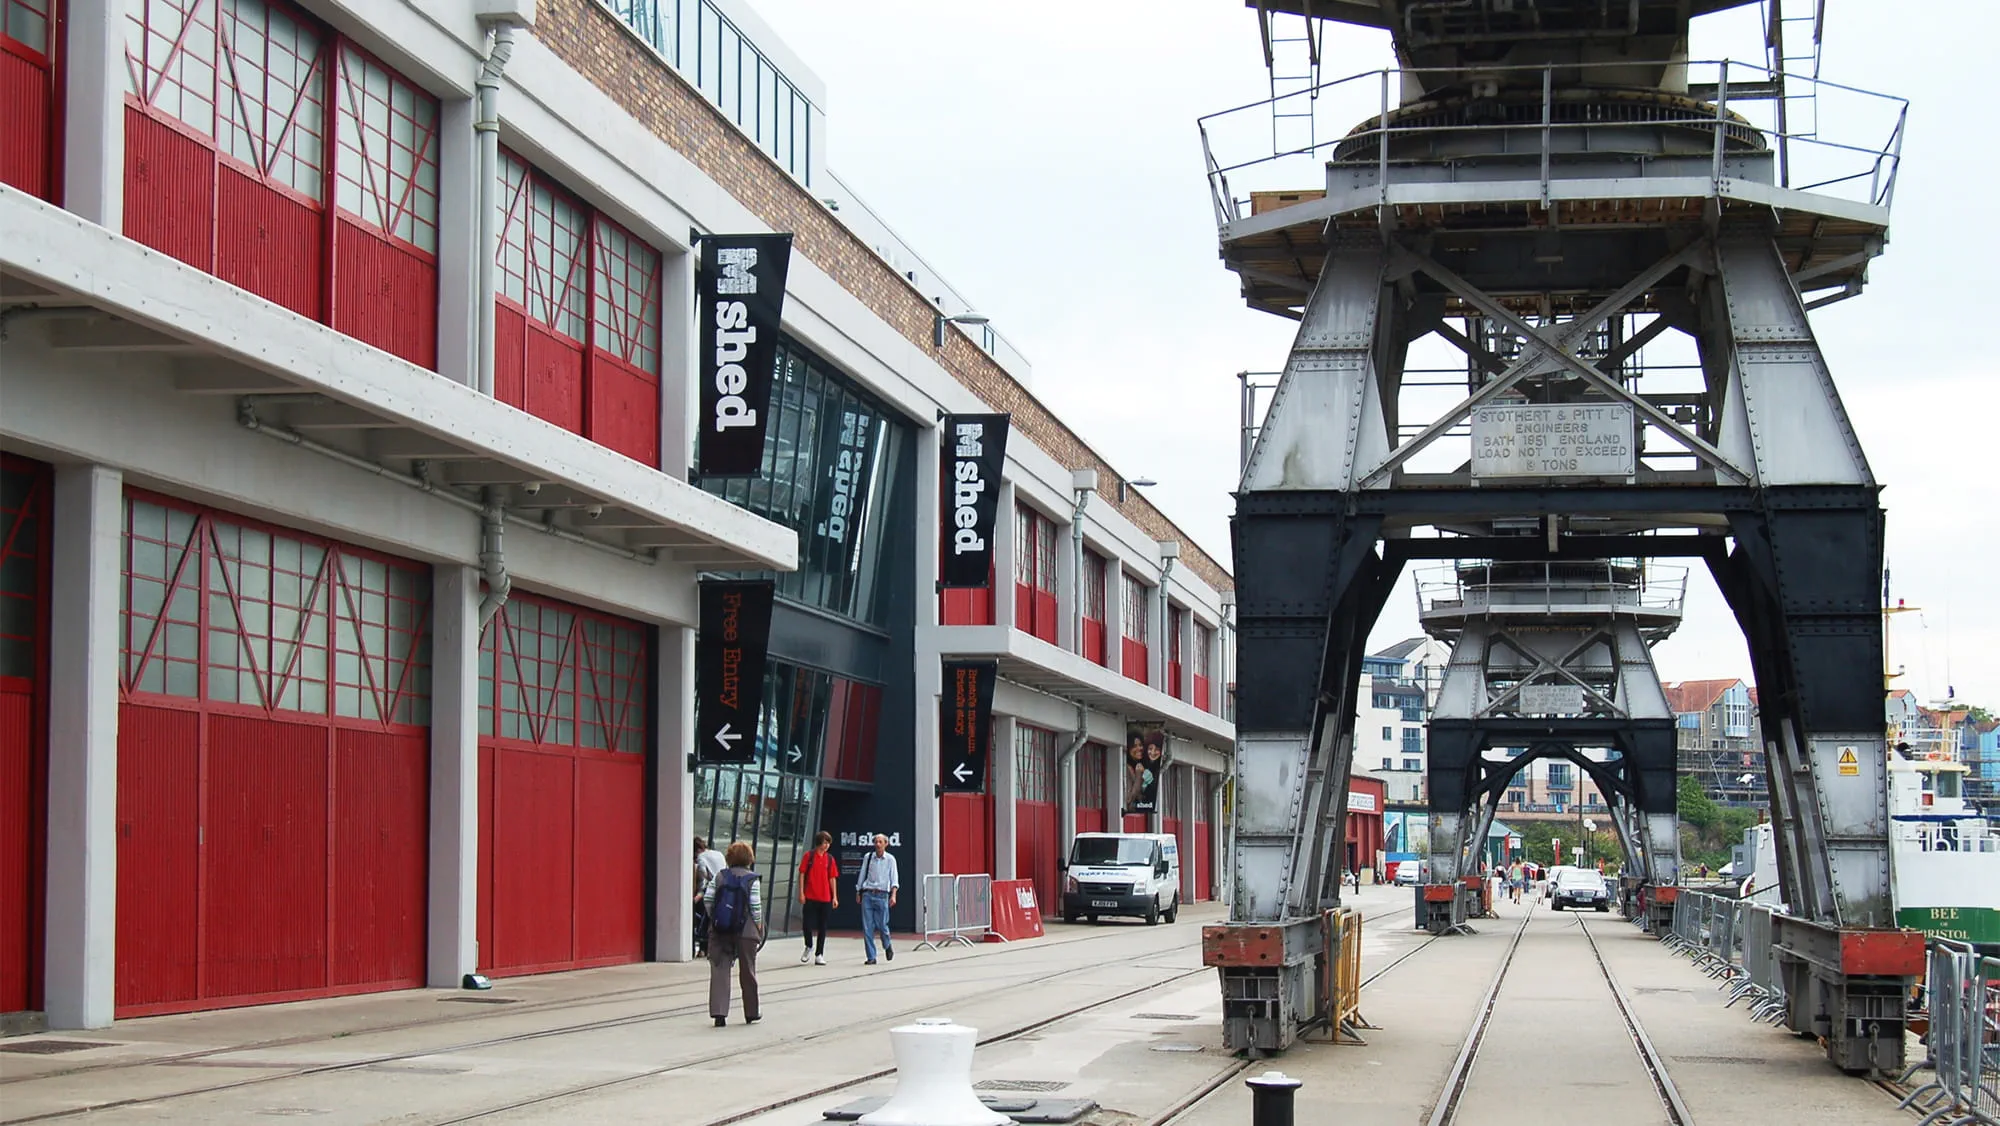 The M Shed museum, Bristol. The museum is located in a dockside transit shed built in 1951, located on Prince's Wharf waterfront.